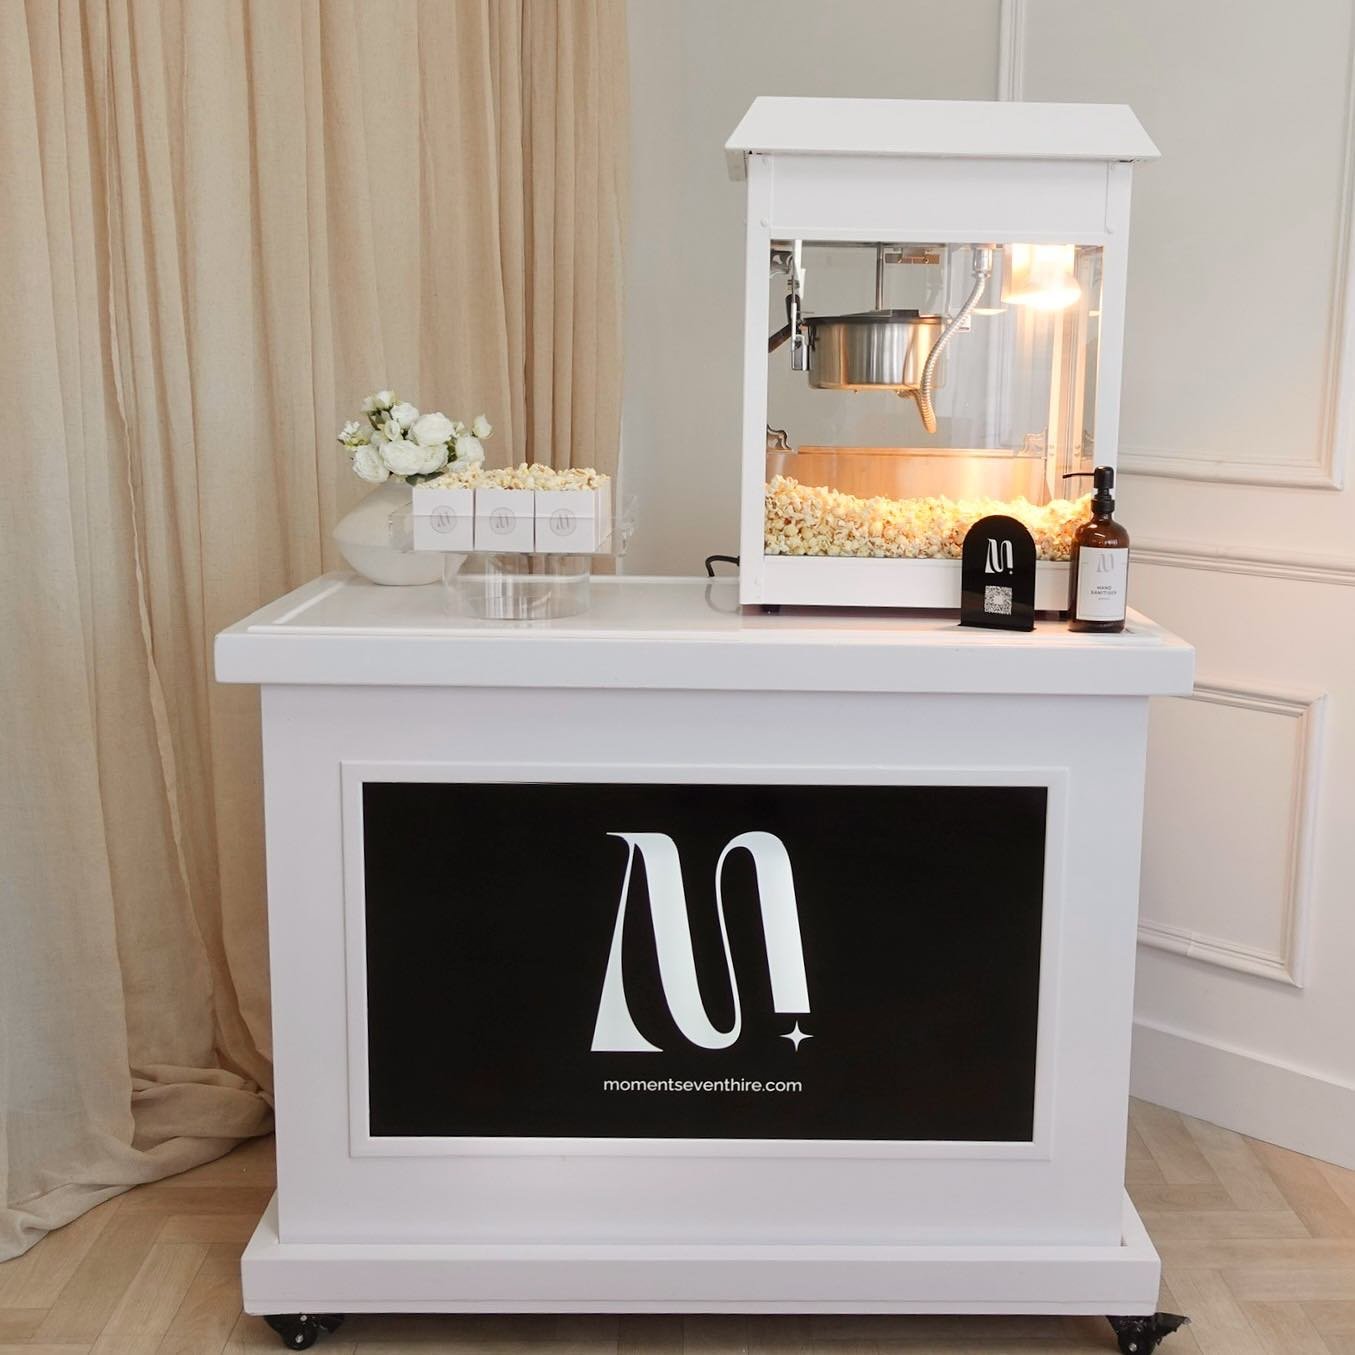 Popcorn party, anyone? Our new popcorn cart is here to make your next event extra special with it&rsquo;s customisable screen and custom popcorn boxes! Our Canvas, Your Vision🍿✨
.
.
.
.
.
#popcorncart #popcornmachine #popcornmachinehire #eventhire #